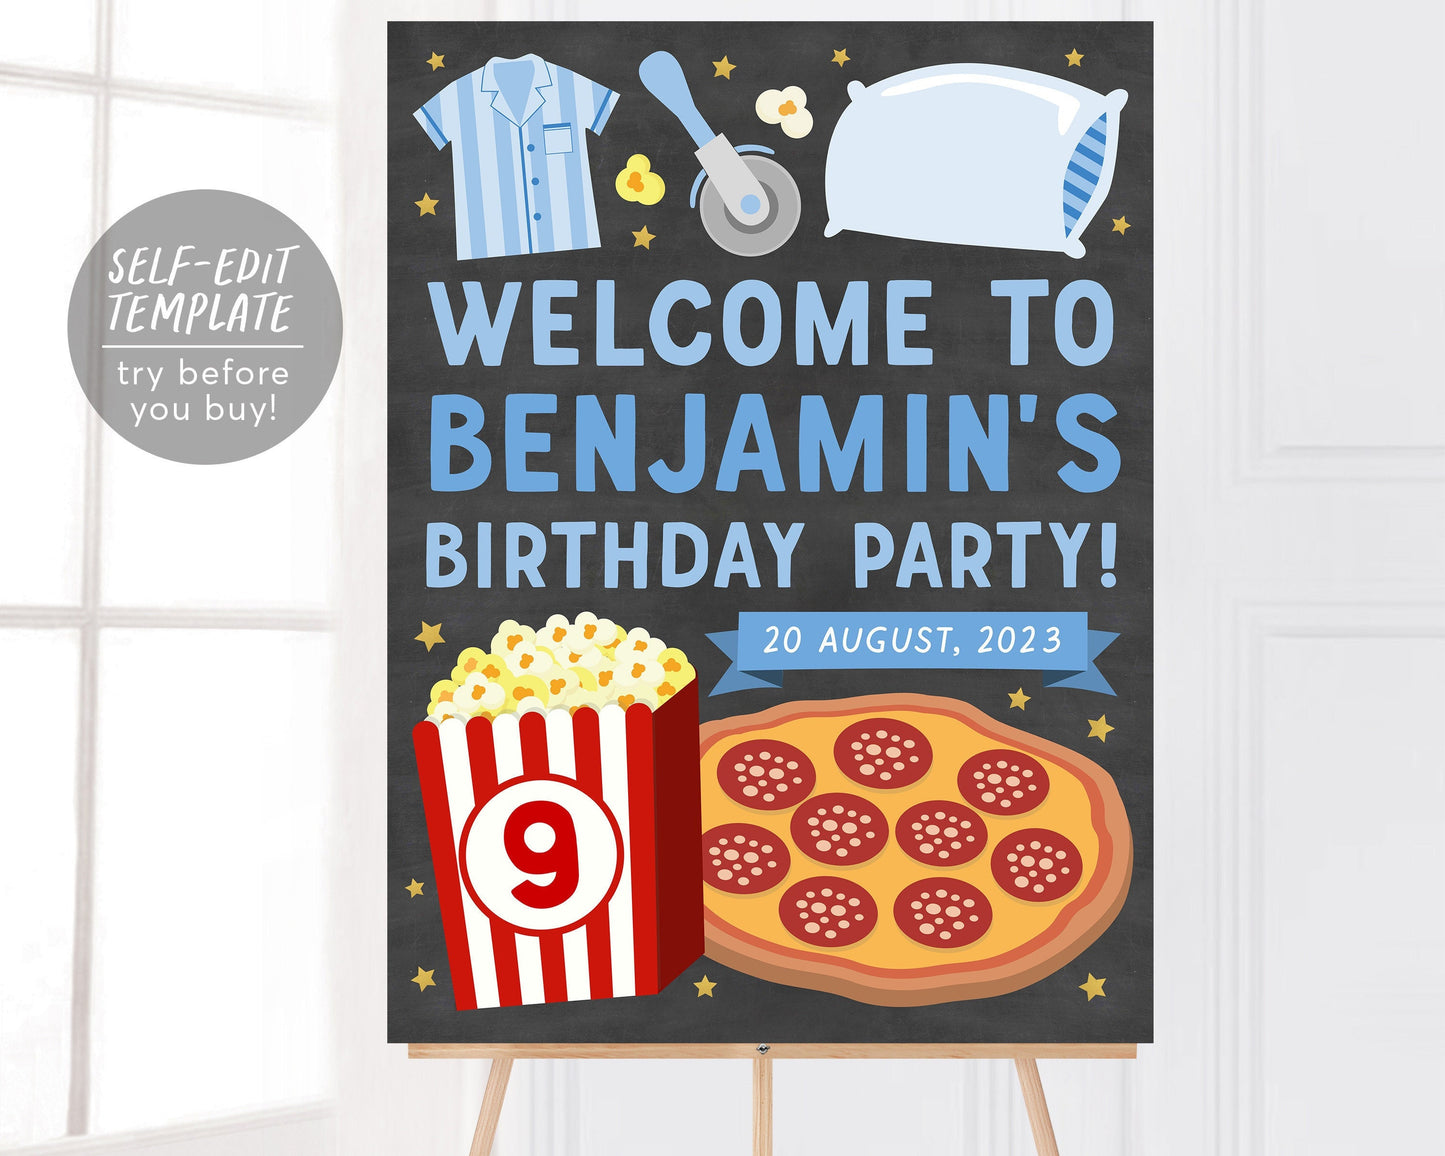 Pizza Popcorn Sleepover Party Birthday Welcome Sign Boy Editable Template, Pizzeria A Slice of Fun Slumber Party Decor Poster Chalkboard